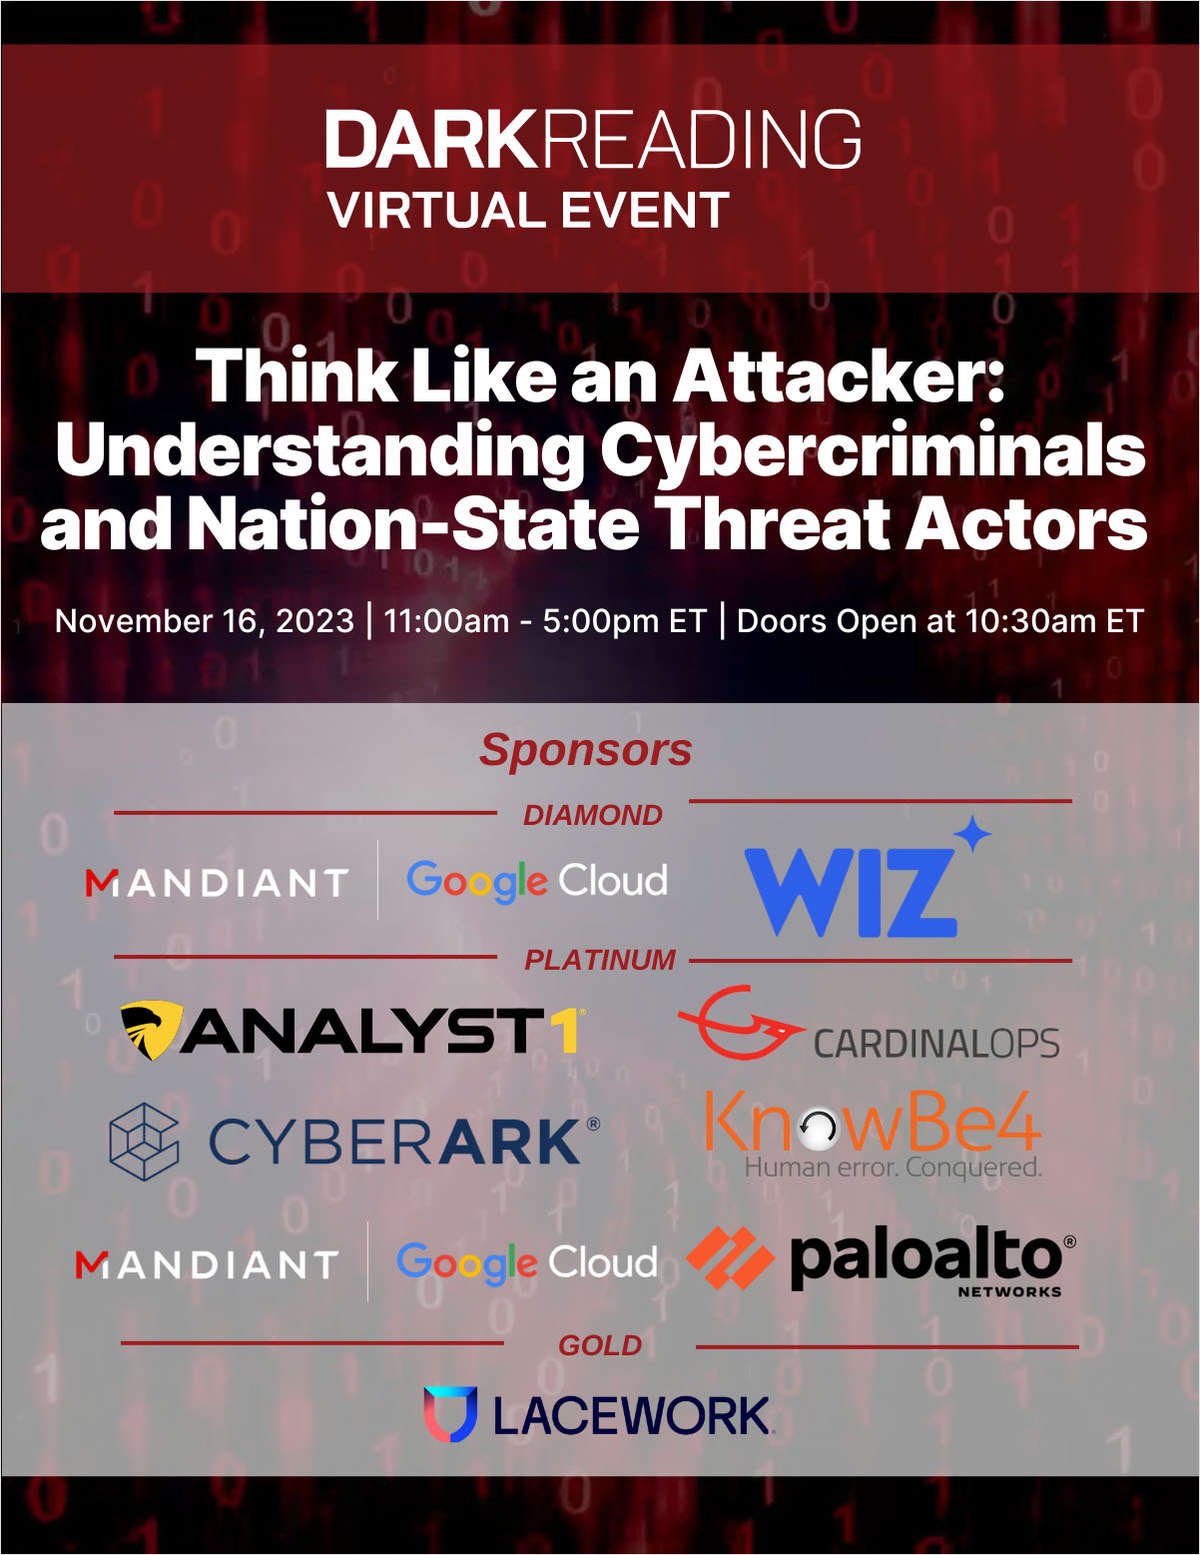 Think Like an Attacker: Understanding Cybercriminals and Nation-State Threat Actors